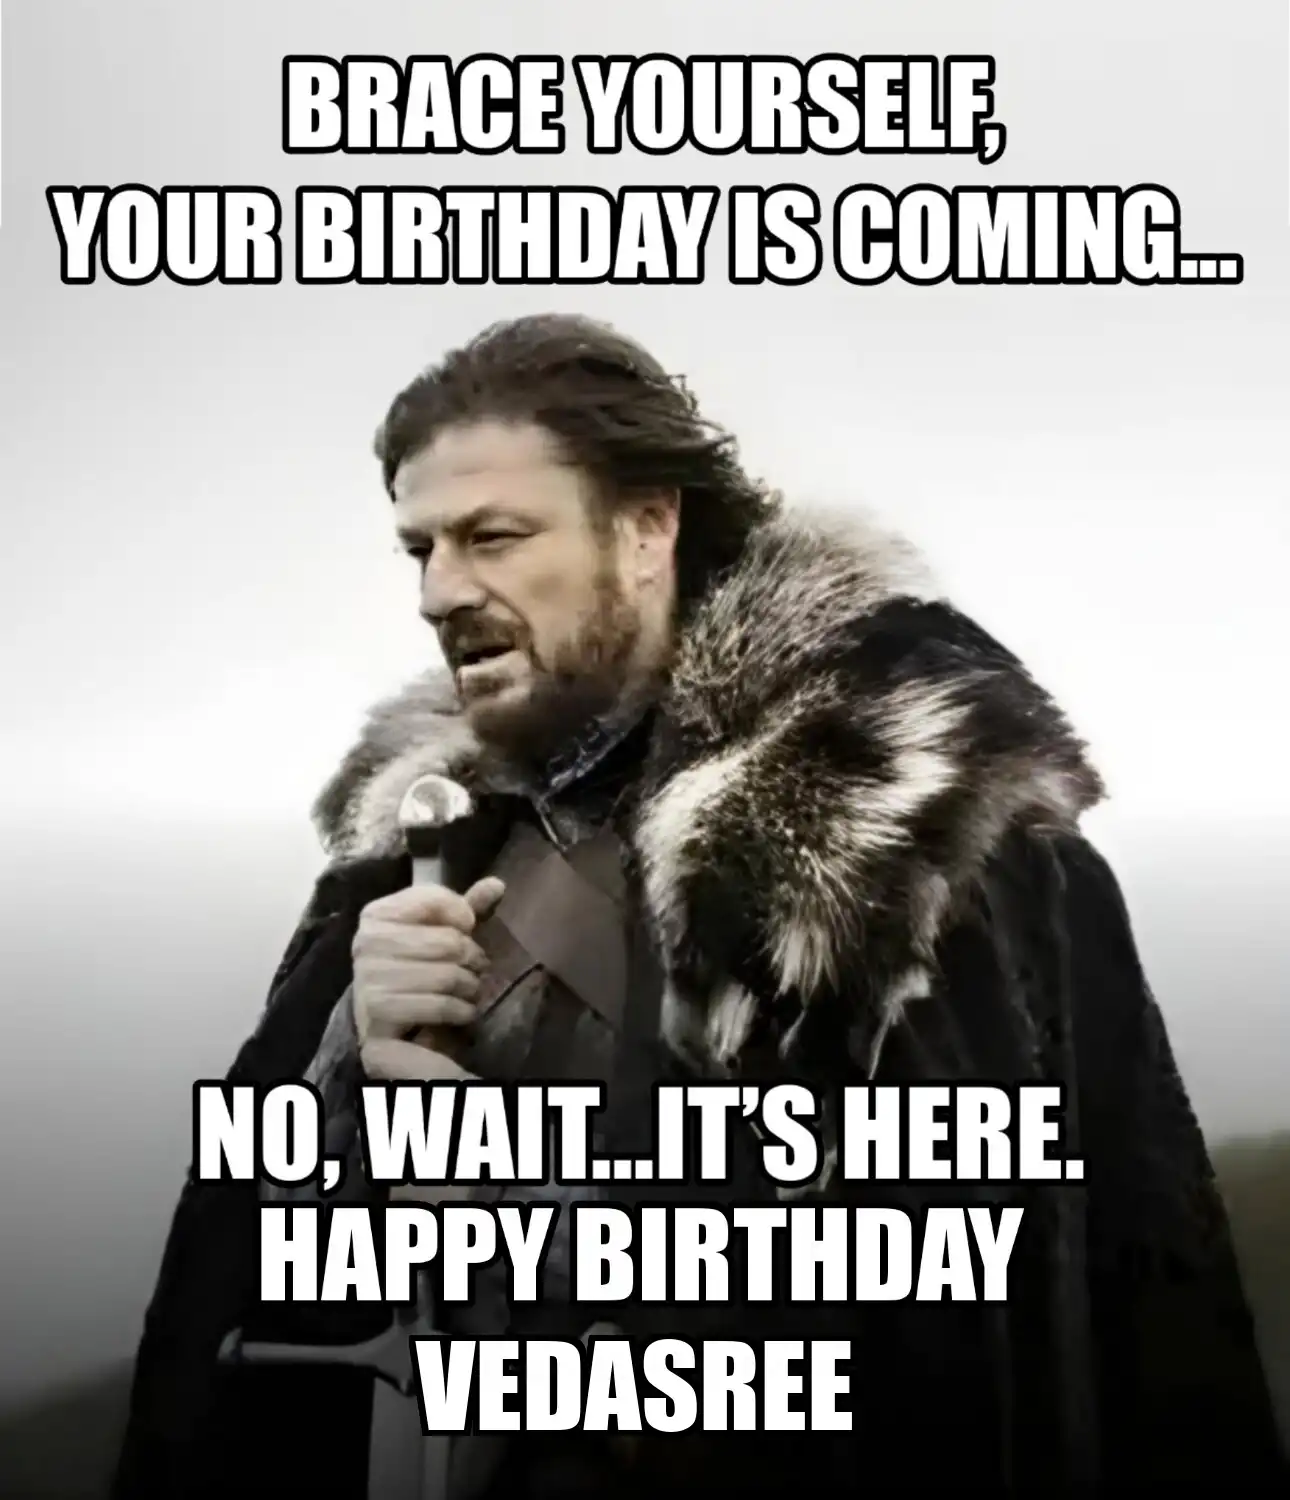 Happy Birthday Vedasree Brace Yourself Your Birthday Is Coming Meme